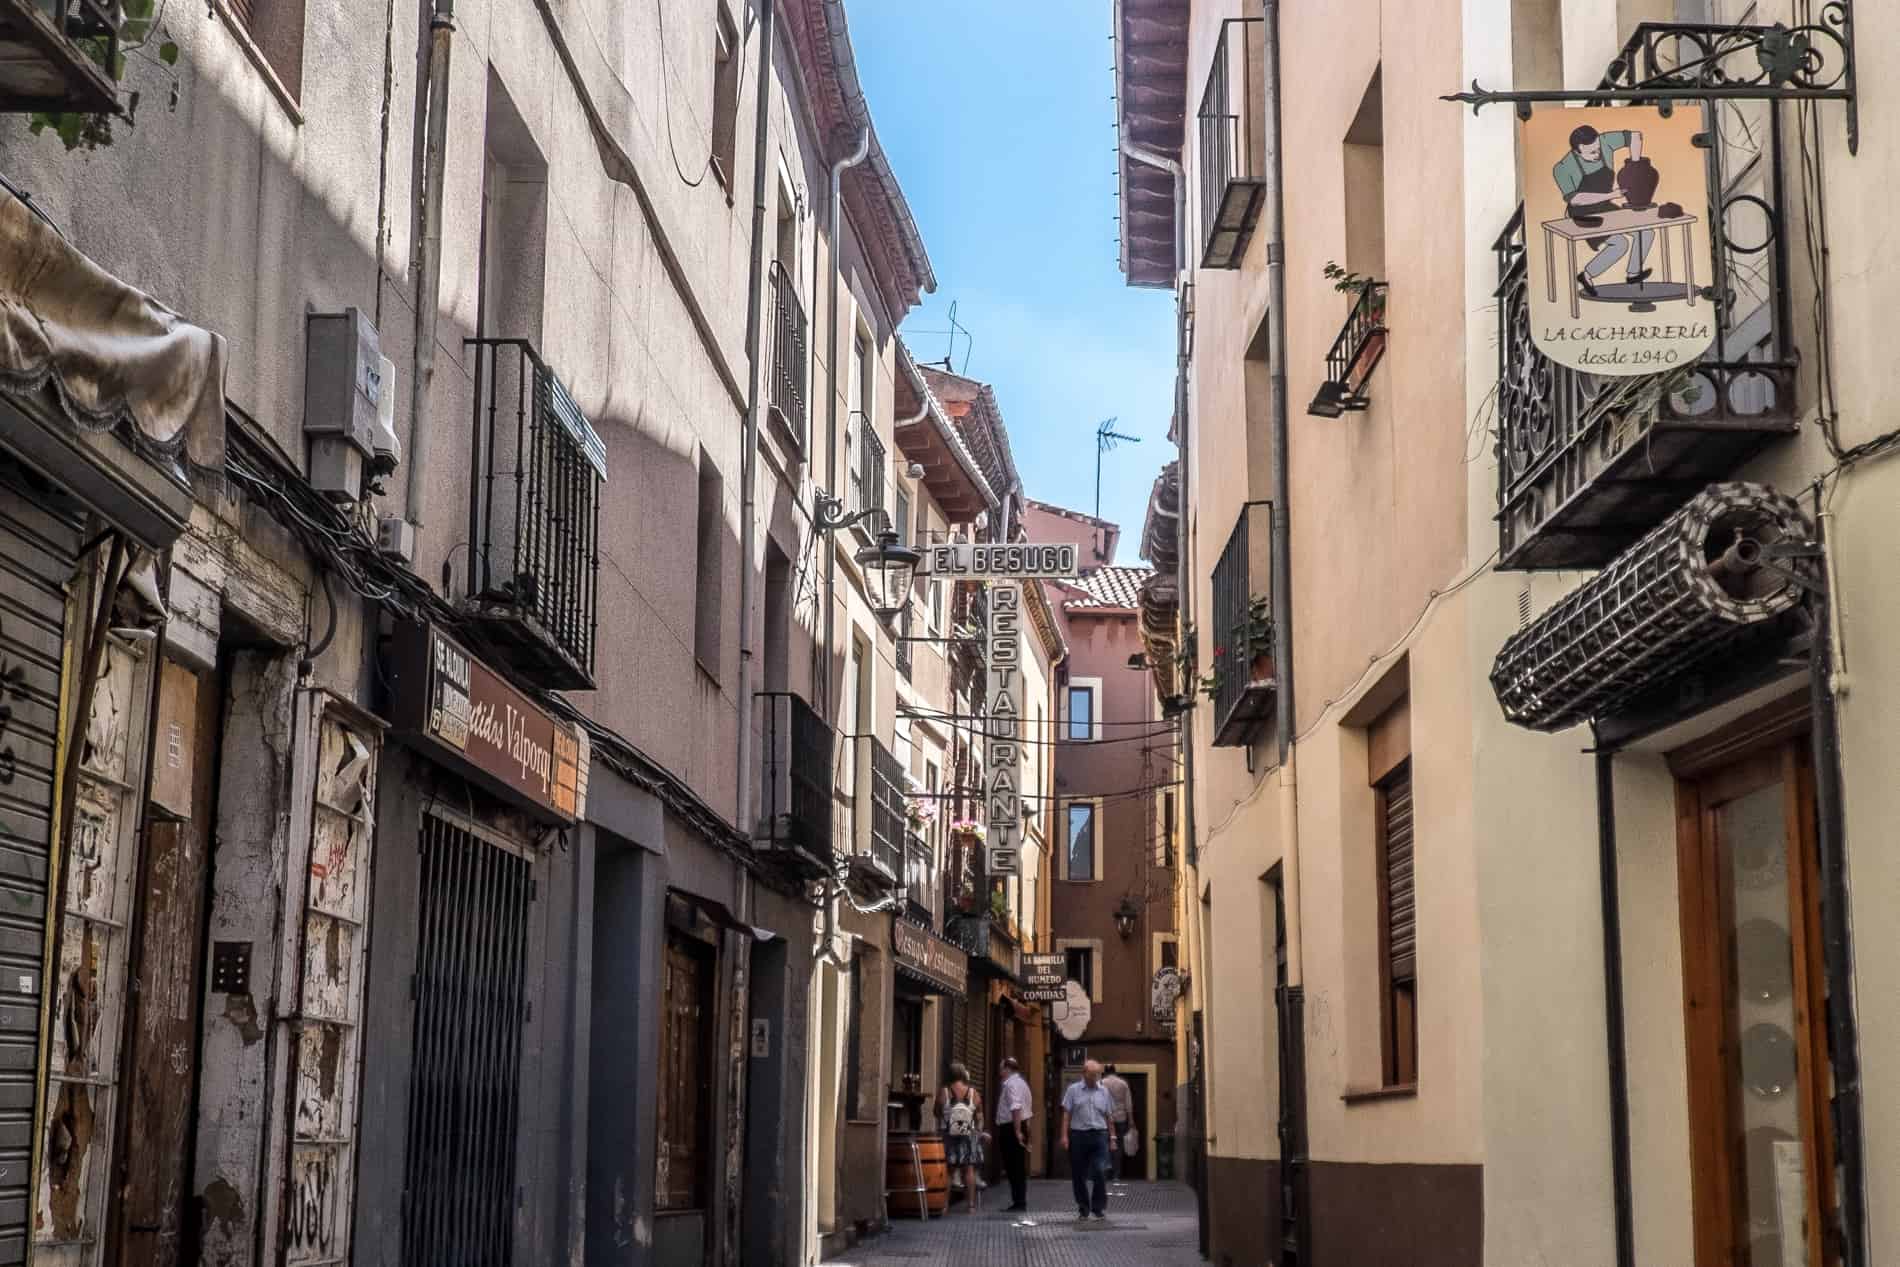 People outside on a narrow street lined with restaurants and bars in Barrio Húmedo, León.